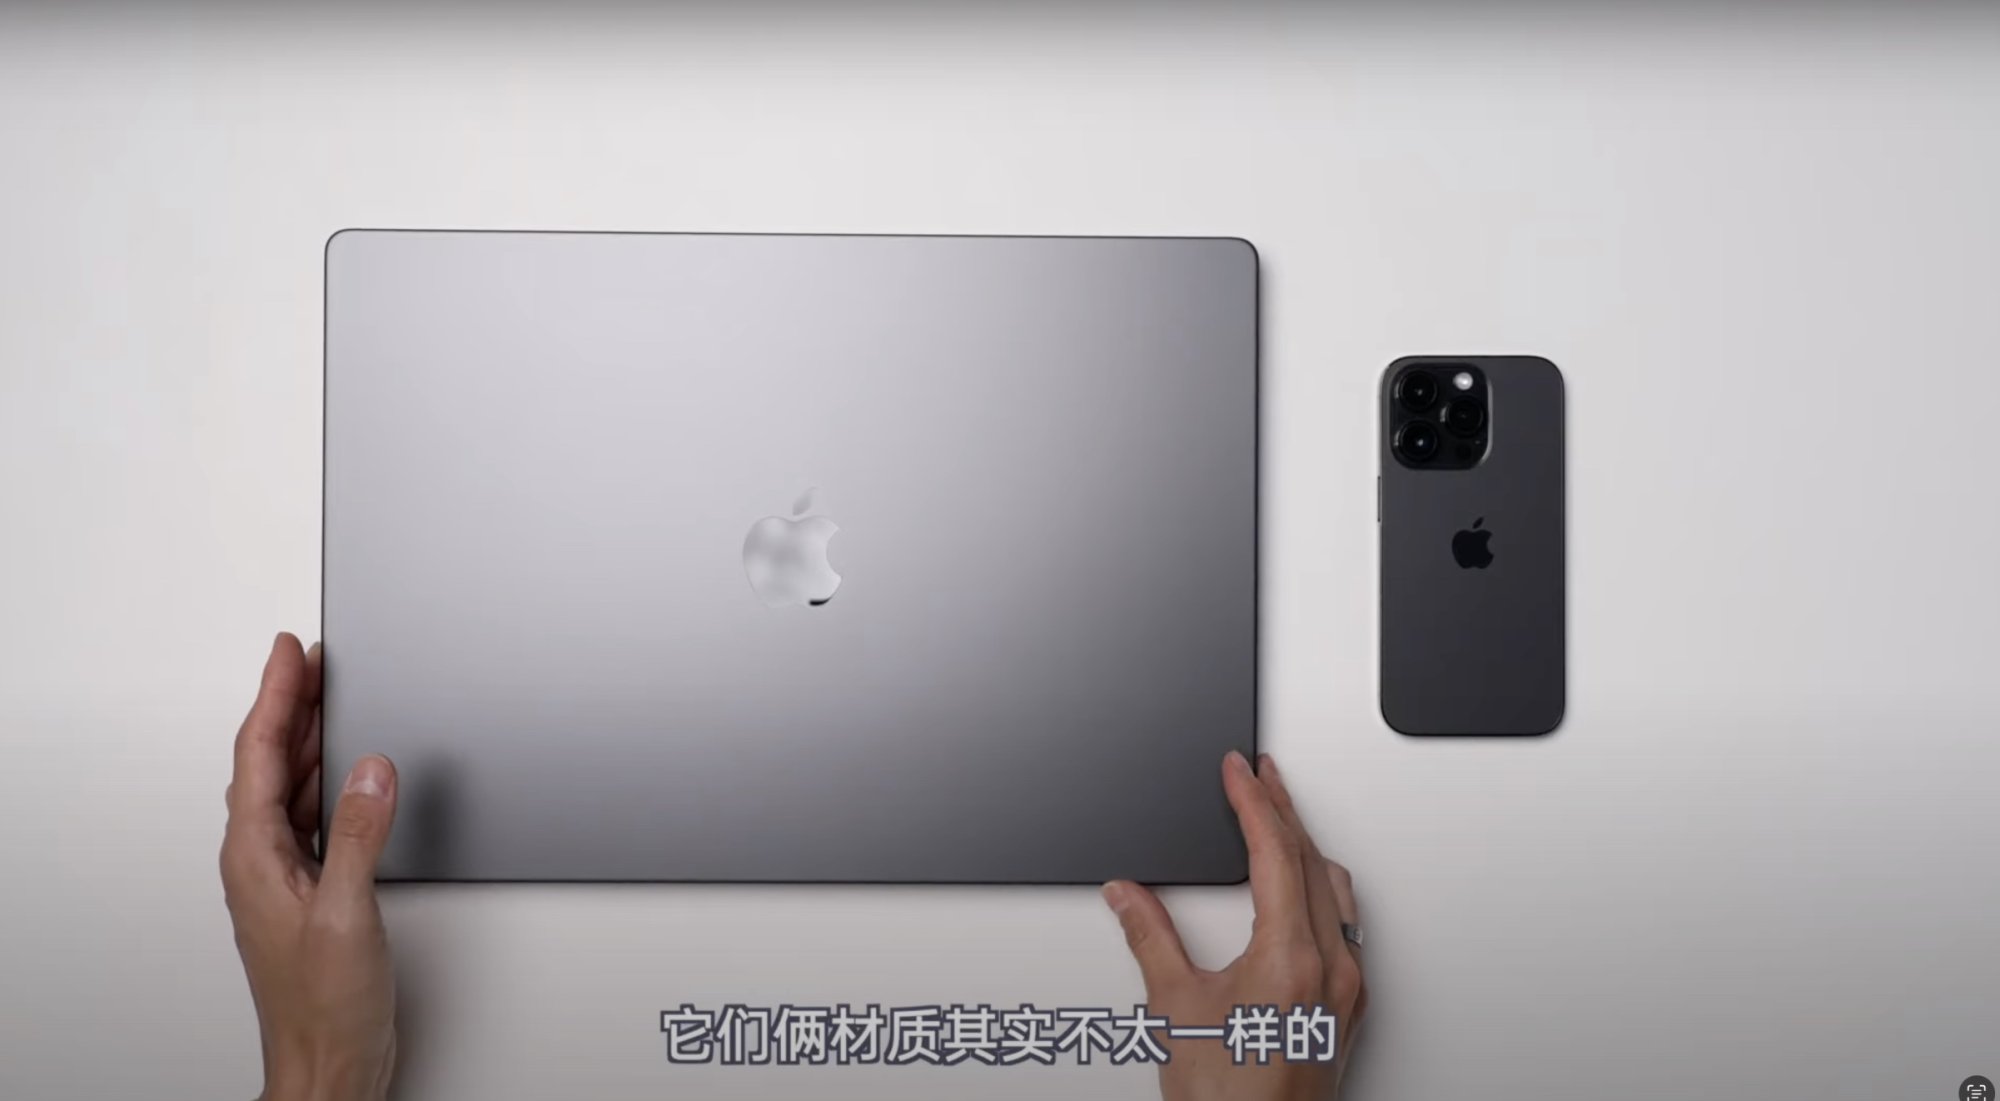 Space Black or Silver MacBook Pro? (Pro and Max chips only